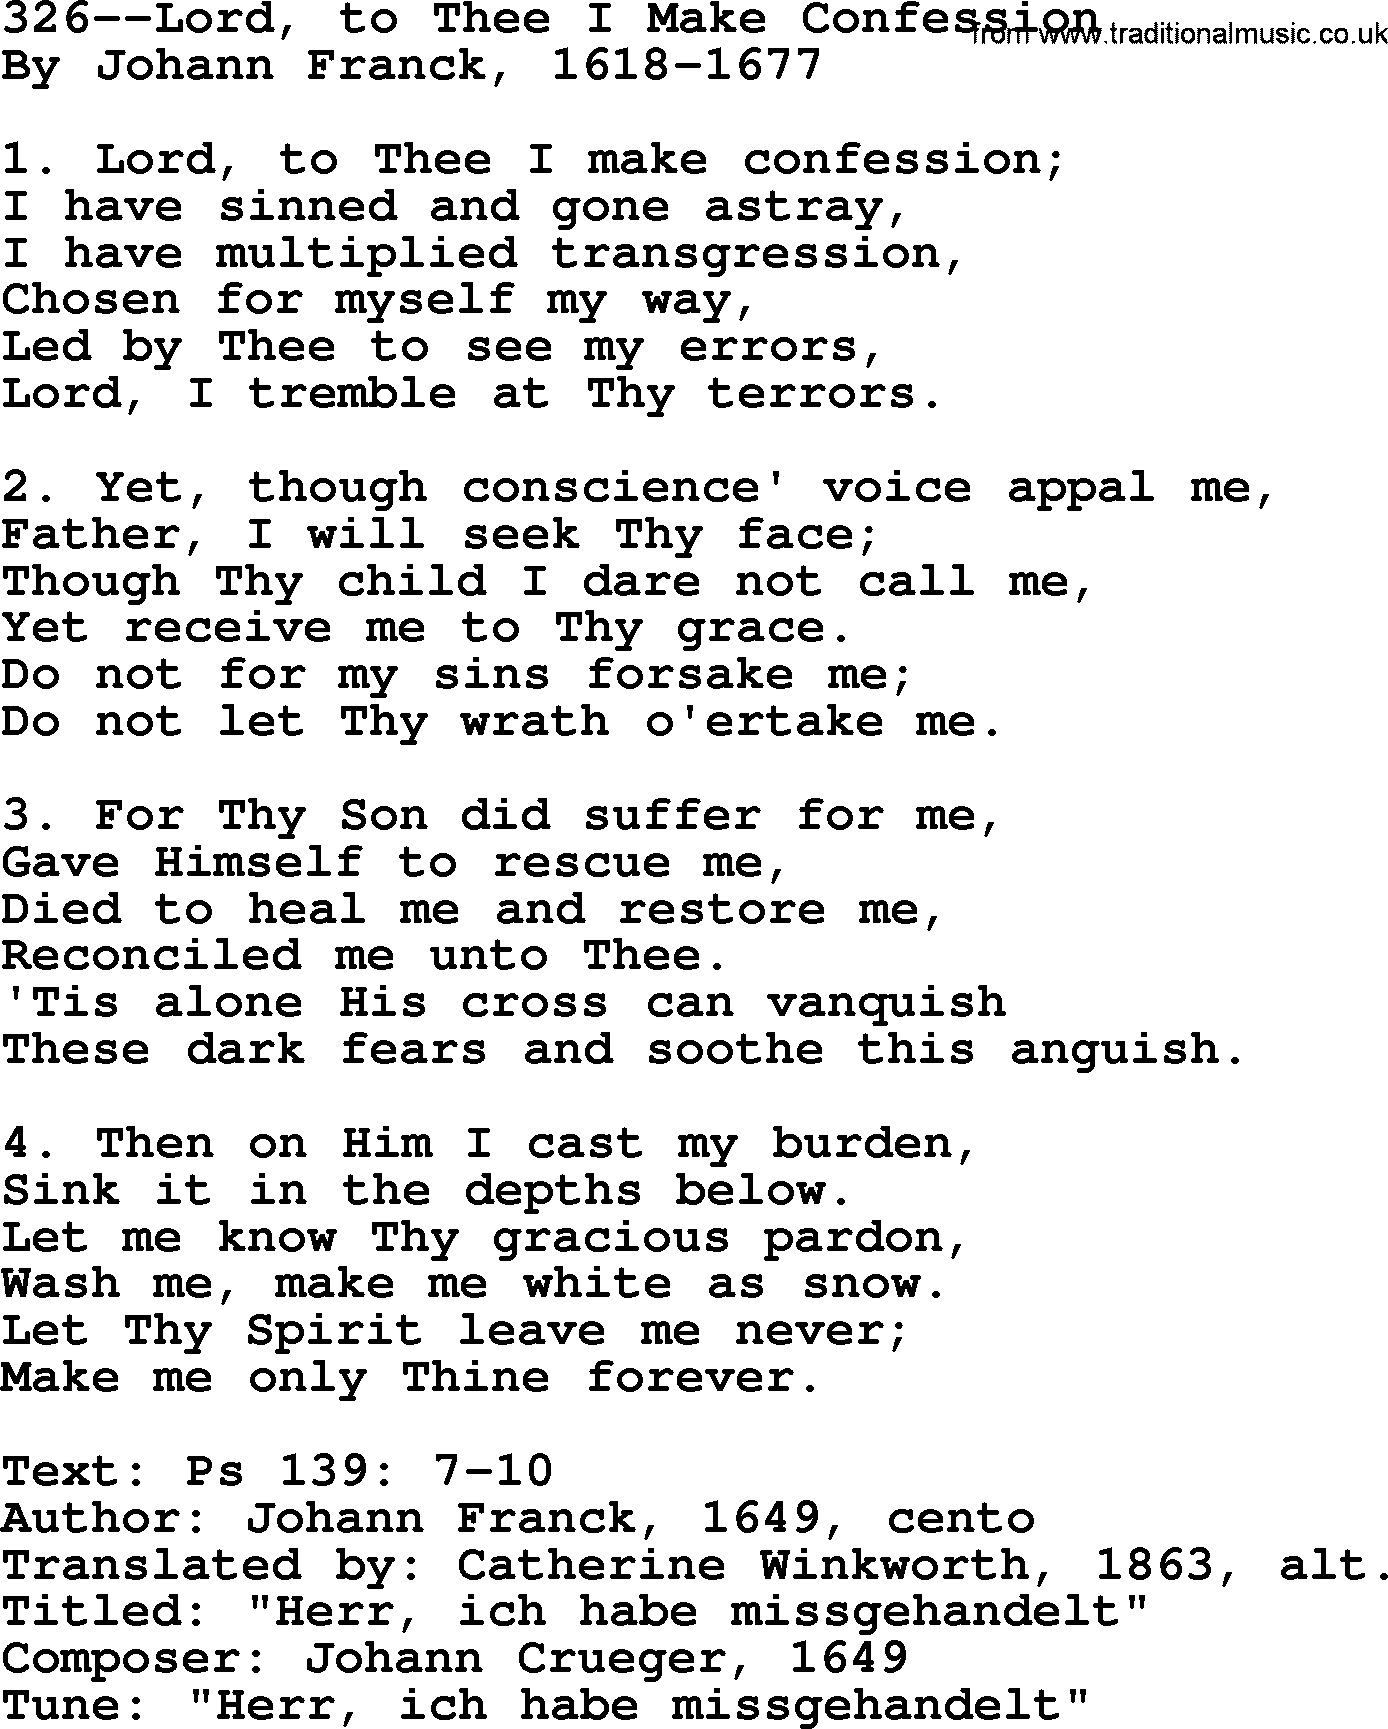 Lutheran Hymn: 326--Lord, to Thee I Make Confession.txt lyrics with PDF